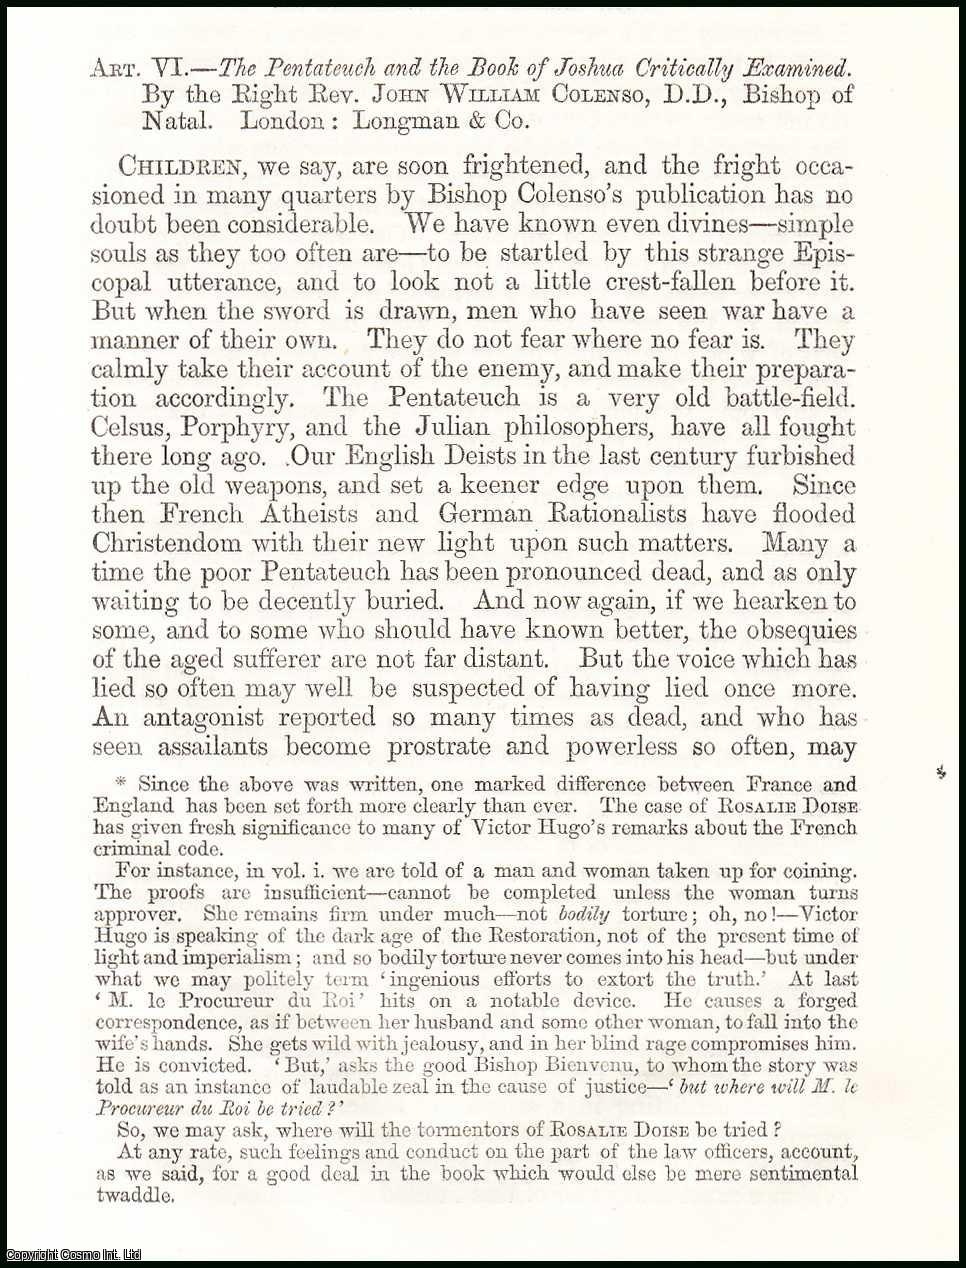 Robert Vaughan - Bishop Colenso, First Bishop of Natal ; The Pentateuch. A rare original article from the British Quarterly Review, 1863.